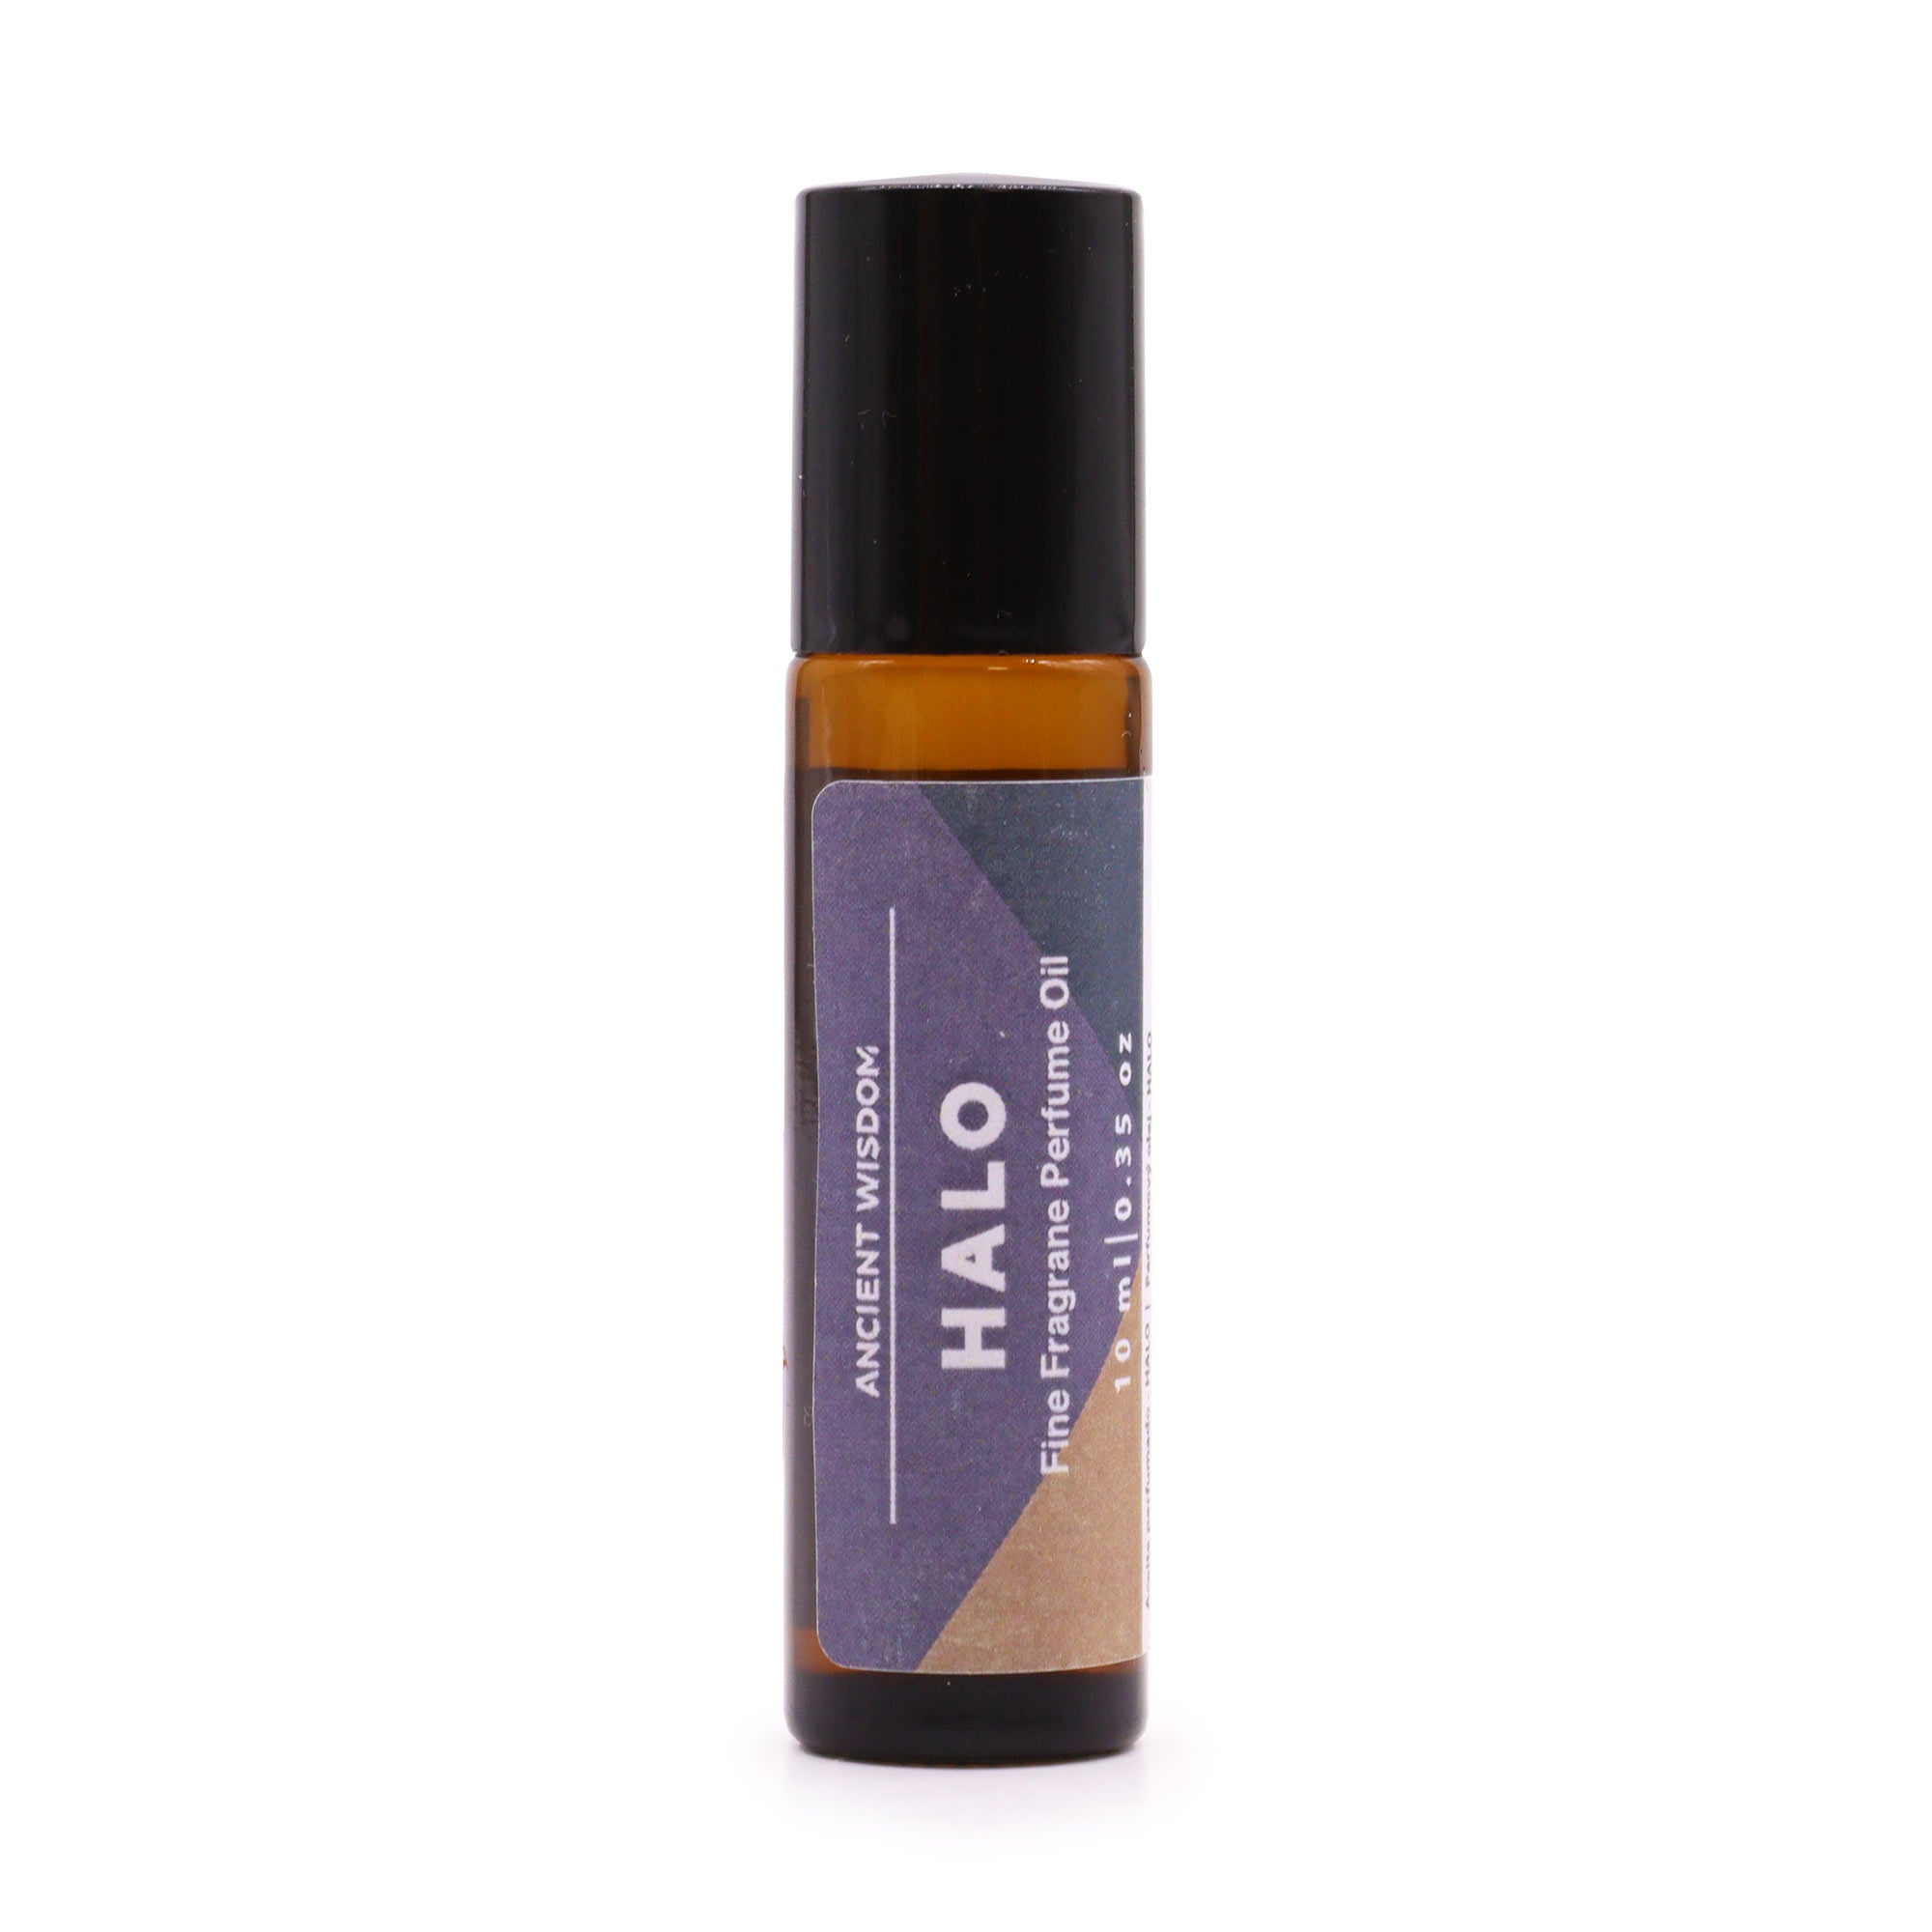 Halo Fine Fragrance Perfume Oil 10ml - Inspired by &